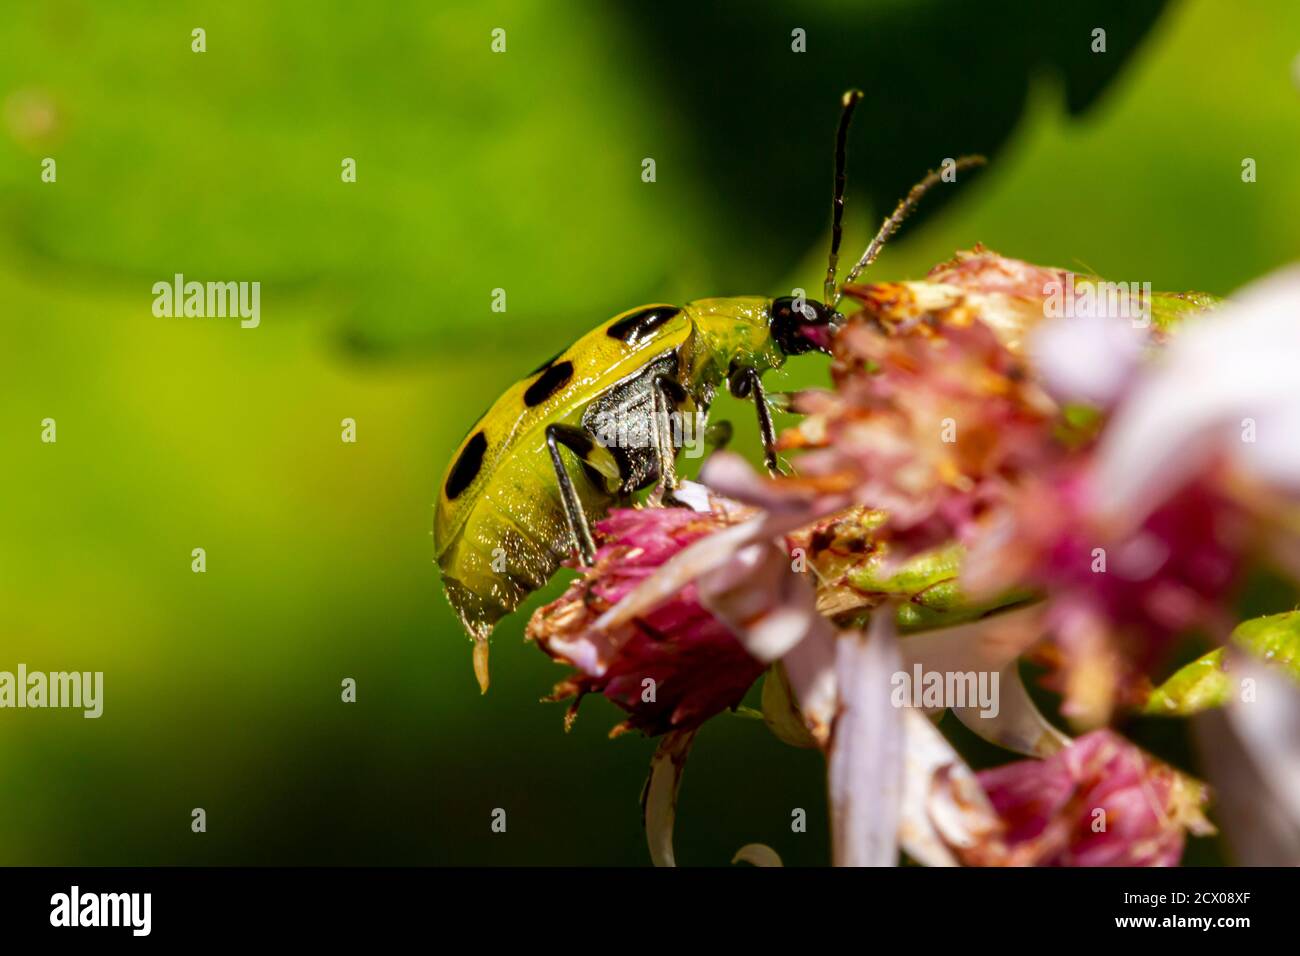 Diabrotica undecimpunctata (southern corn rootworm) a.k.a. spotted cucumber beetle is an agricultural pest that eats roots, bodies and flowers of crop Stock Photo